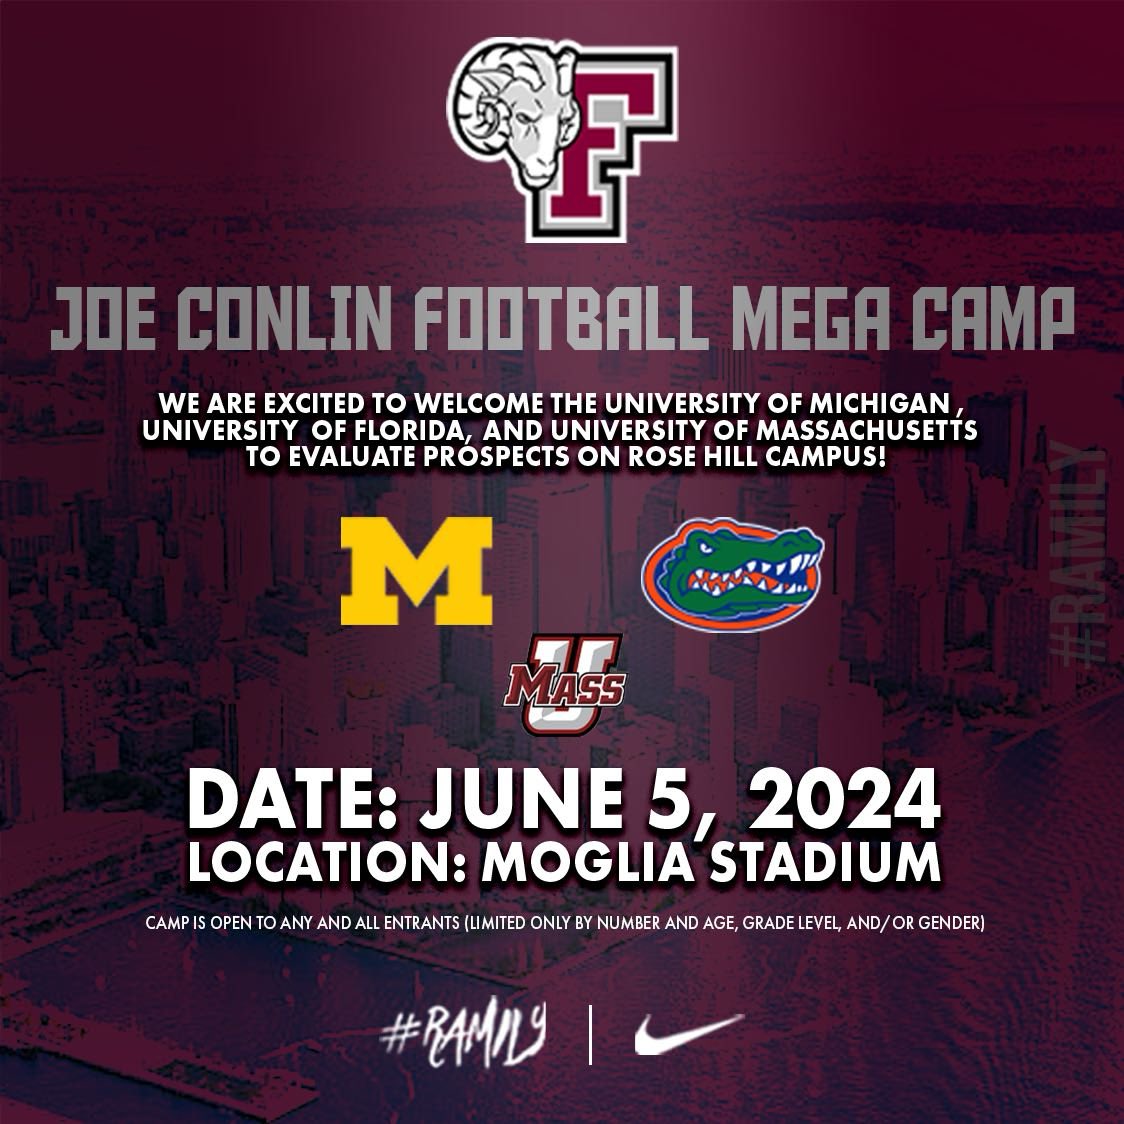 Thank you @_CoachWilks for the Invite can wait to show out!! @CoachQuedenfeld @CoachCano @BrotherRiceFB